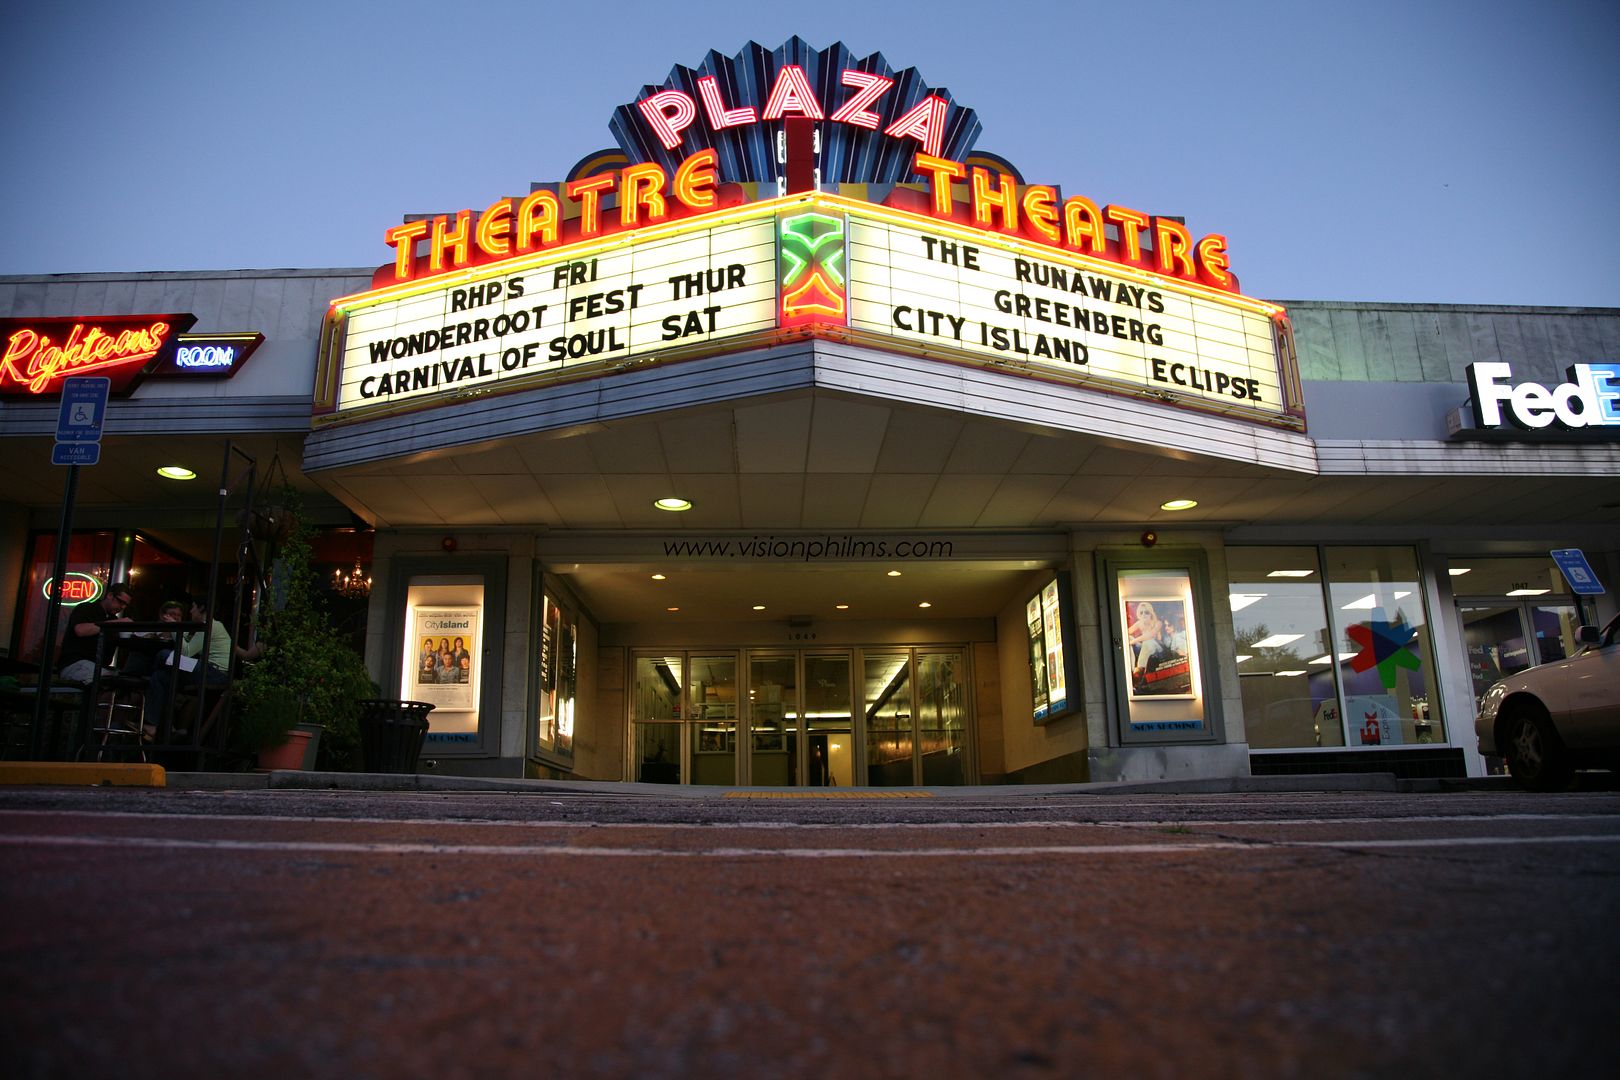 plaza theater,historic theater,independent film,film photography,color photography,atlanta photography,cinema photography,carlton mackey,vision philms,historic photography